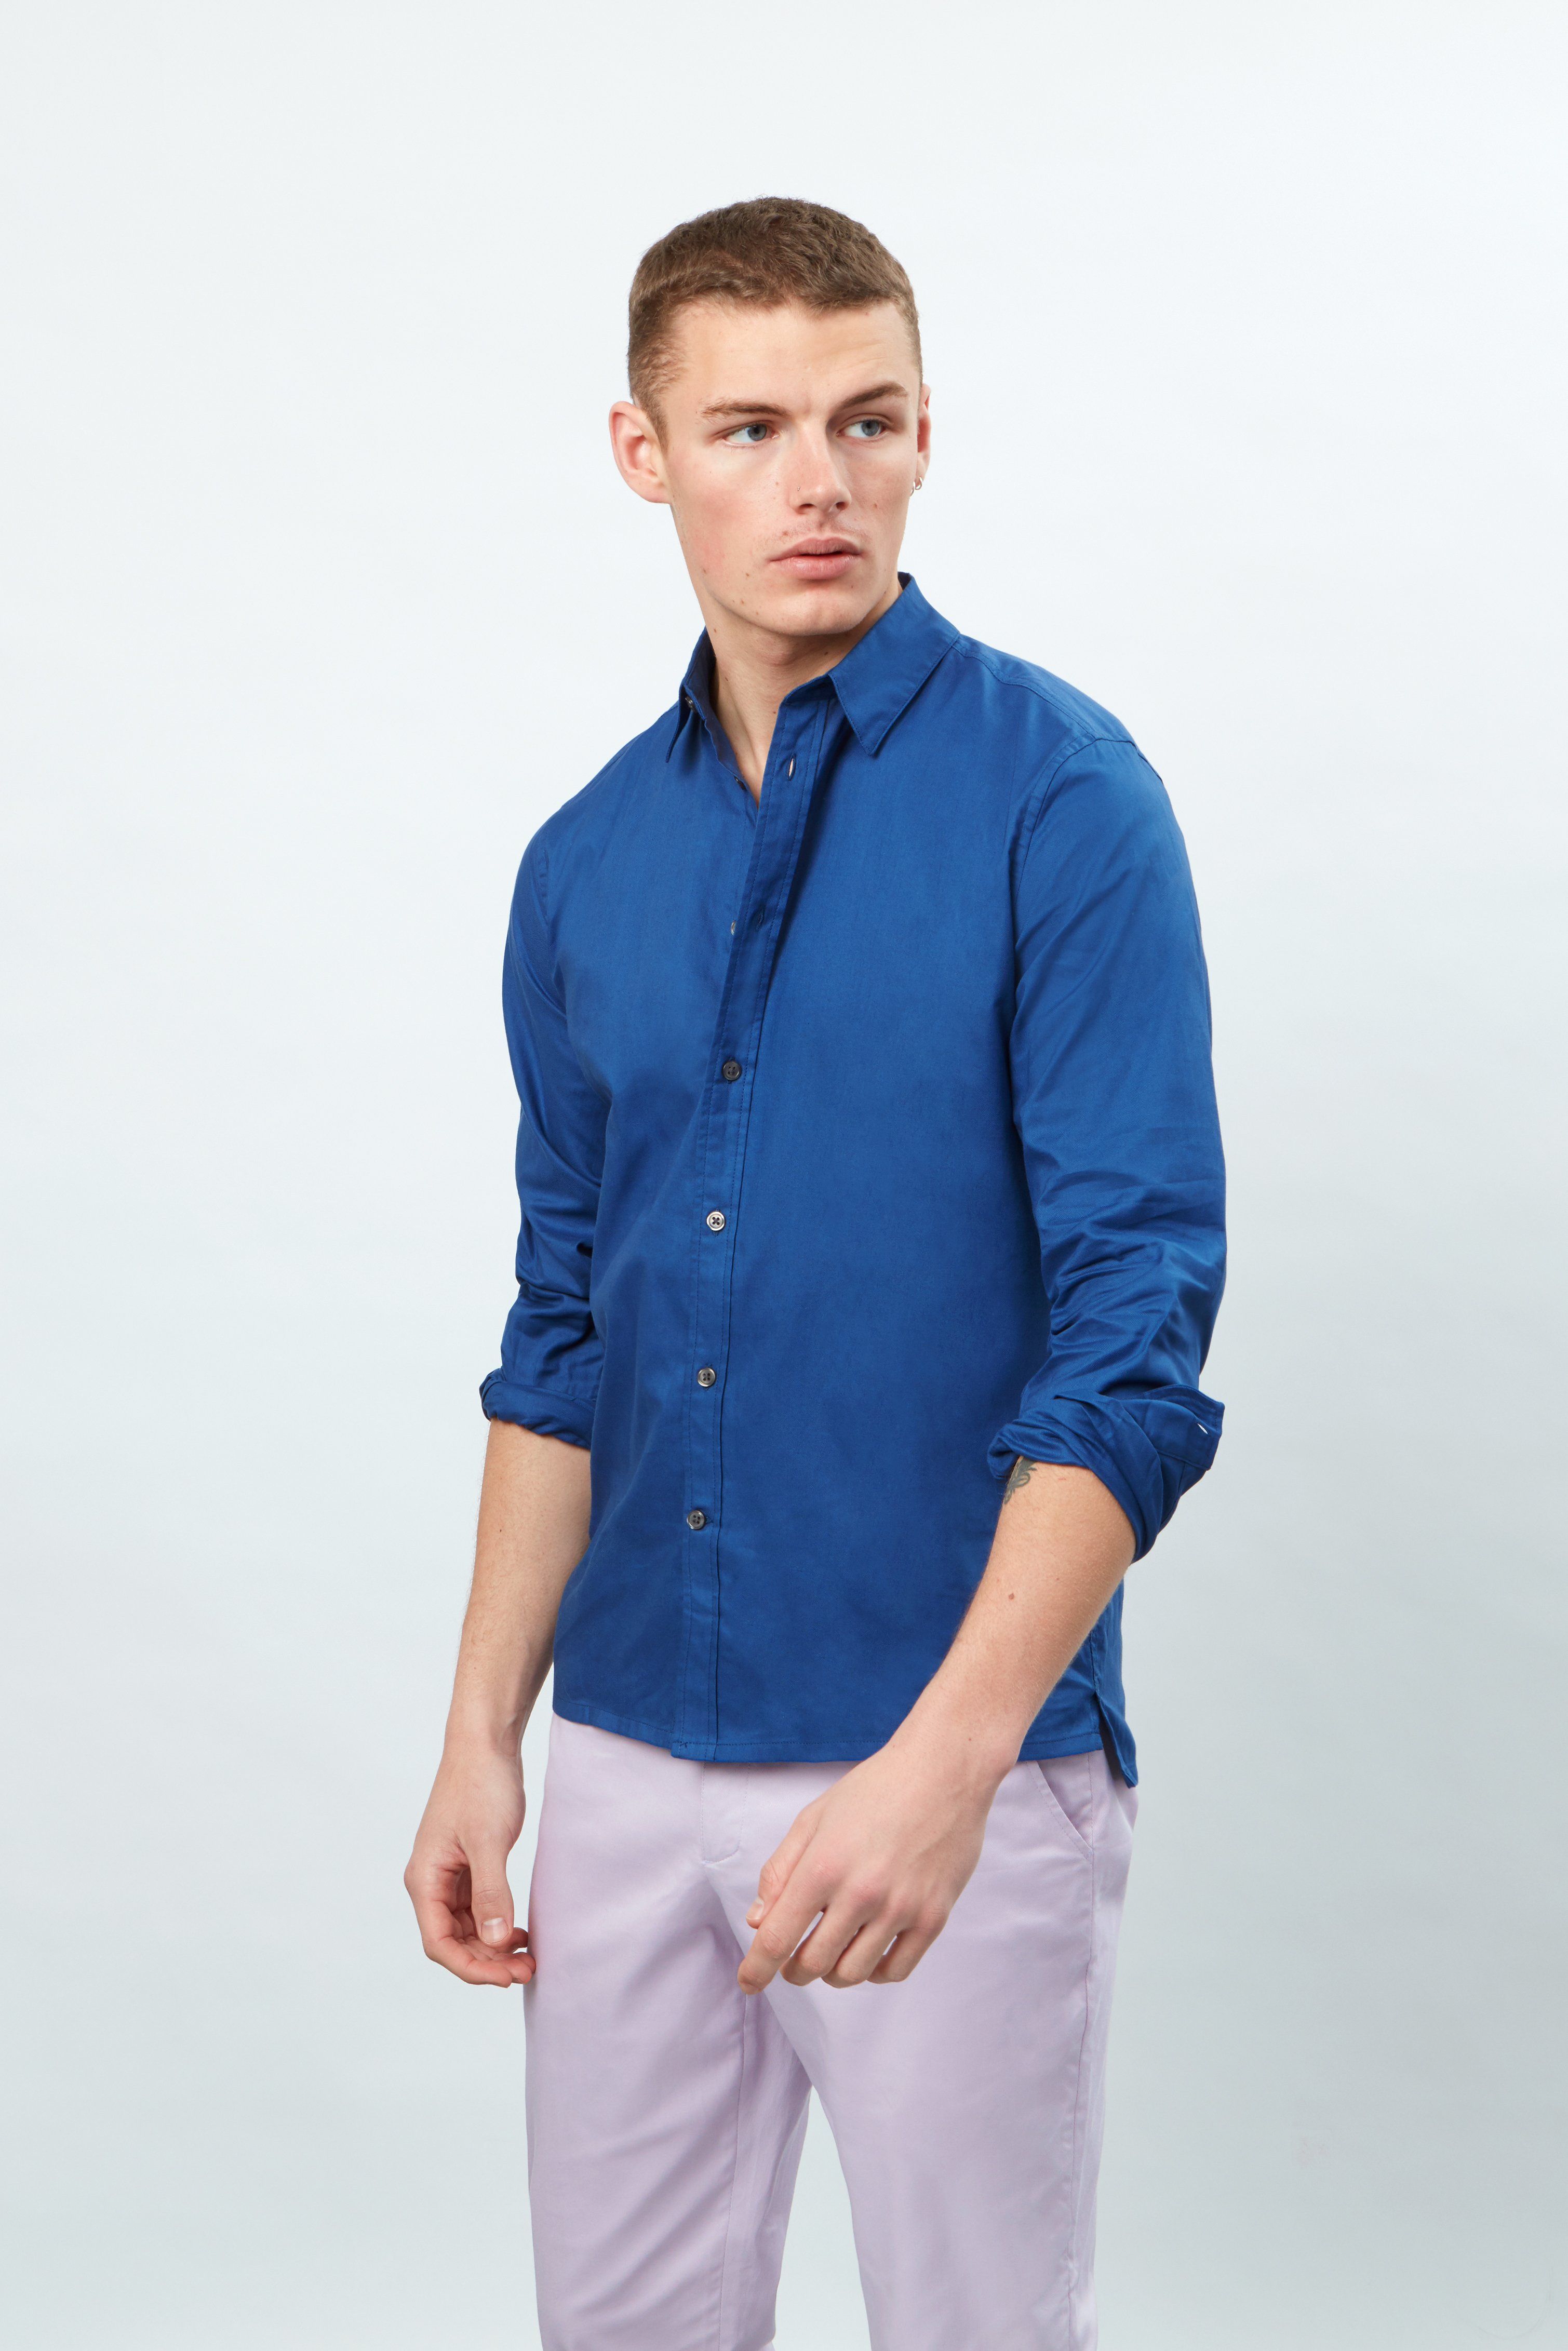 Long Sleeve Shirt
RJL0026
Button front long sleeve shirt in mid weight cotton. 
KEY: Utility, Mid-Weight, Everyday. 
DETAIL: Seven-button front, single button cuffs, soft collar, side vents, locker loop. 
FABRICATION: 100% cotton 
 